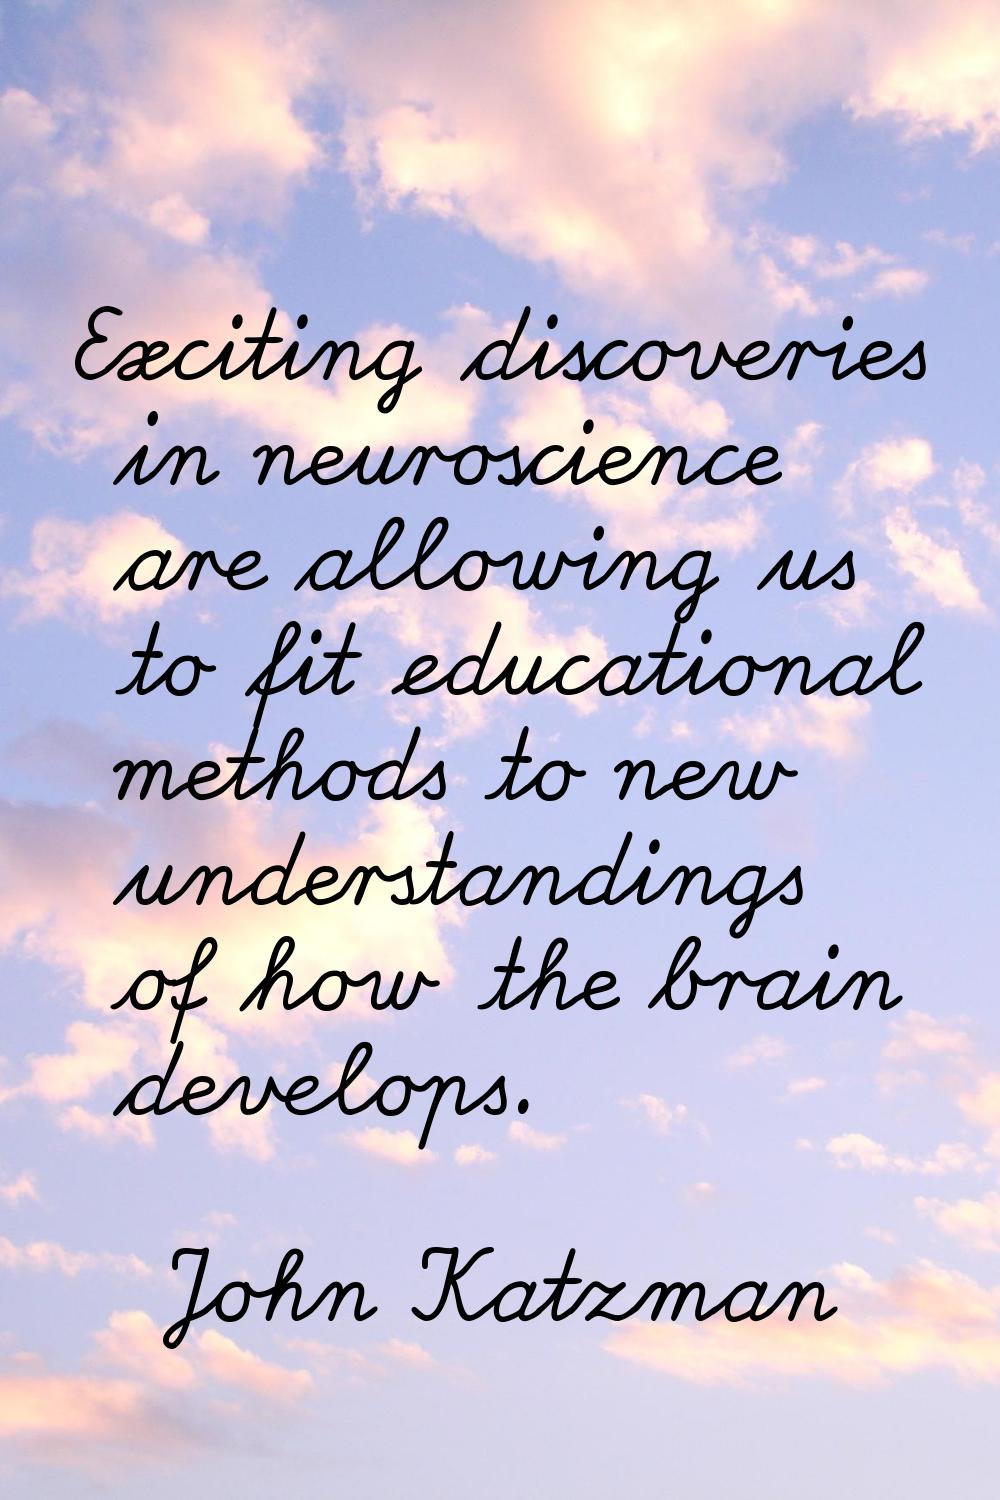 Exciting discoveries in neuroscience are allowing us to fit educational methods to new understandin